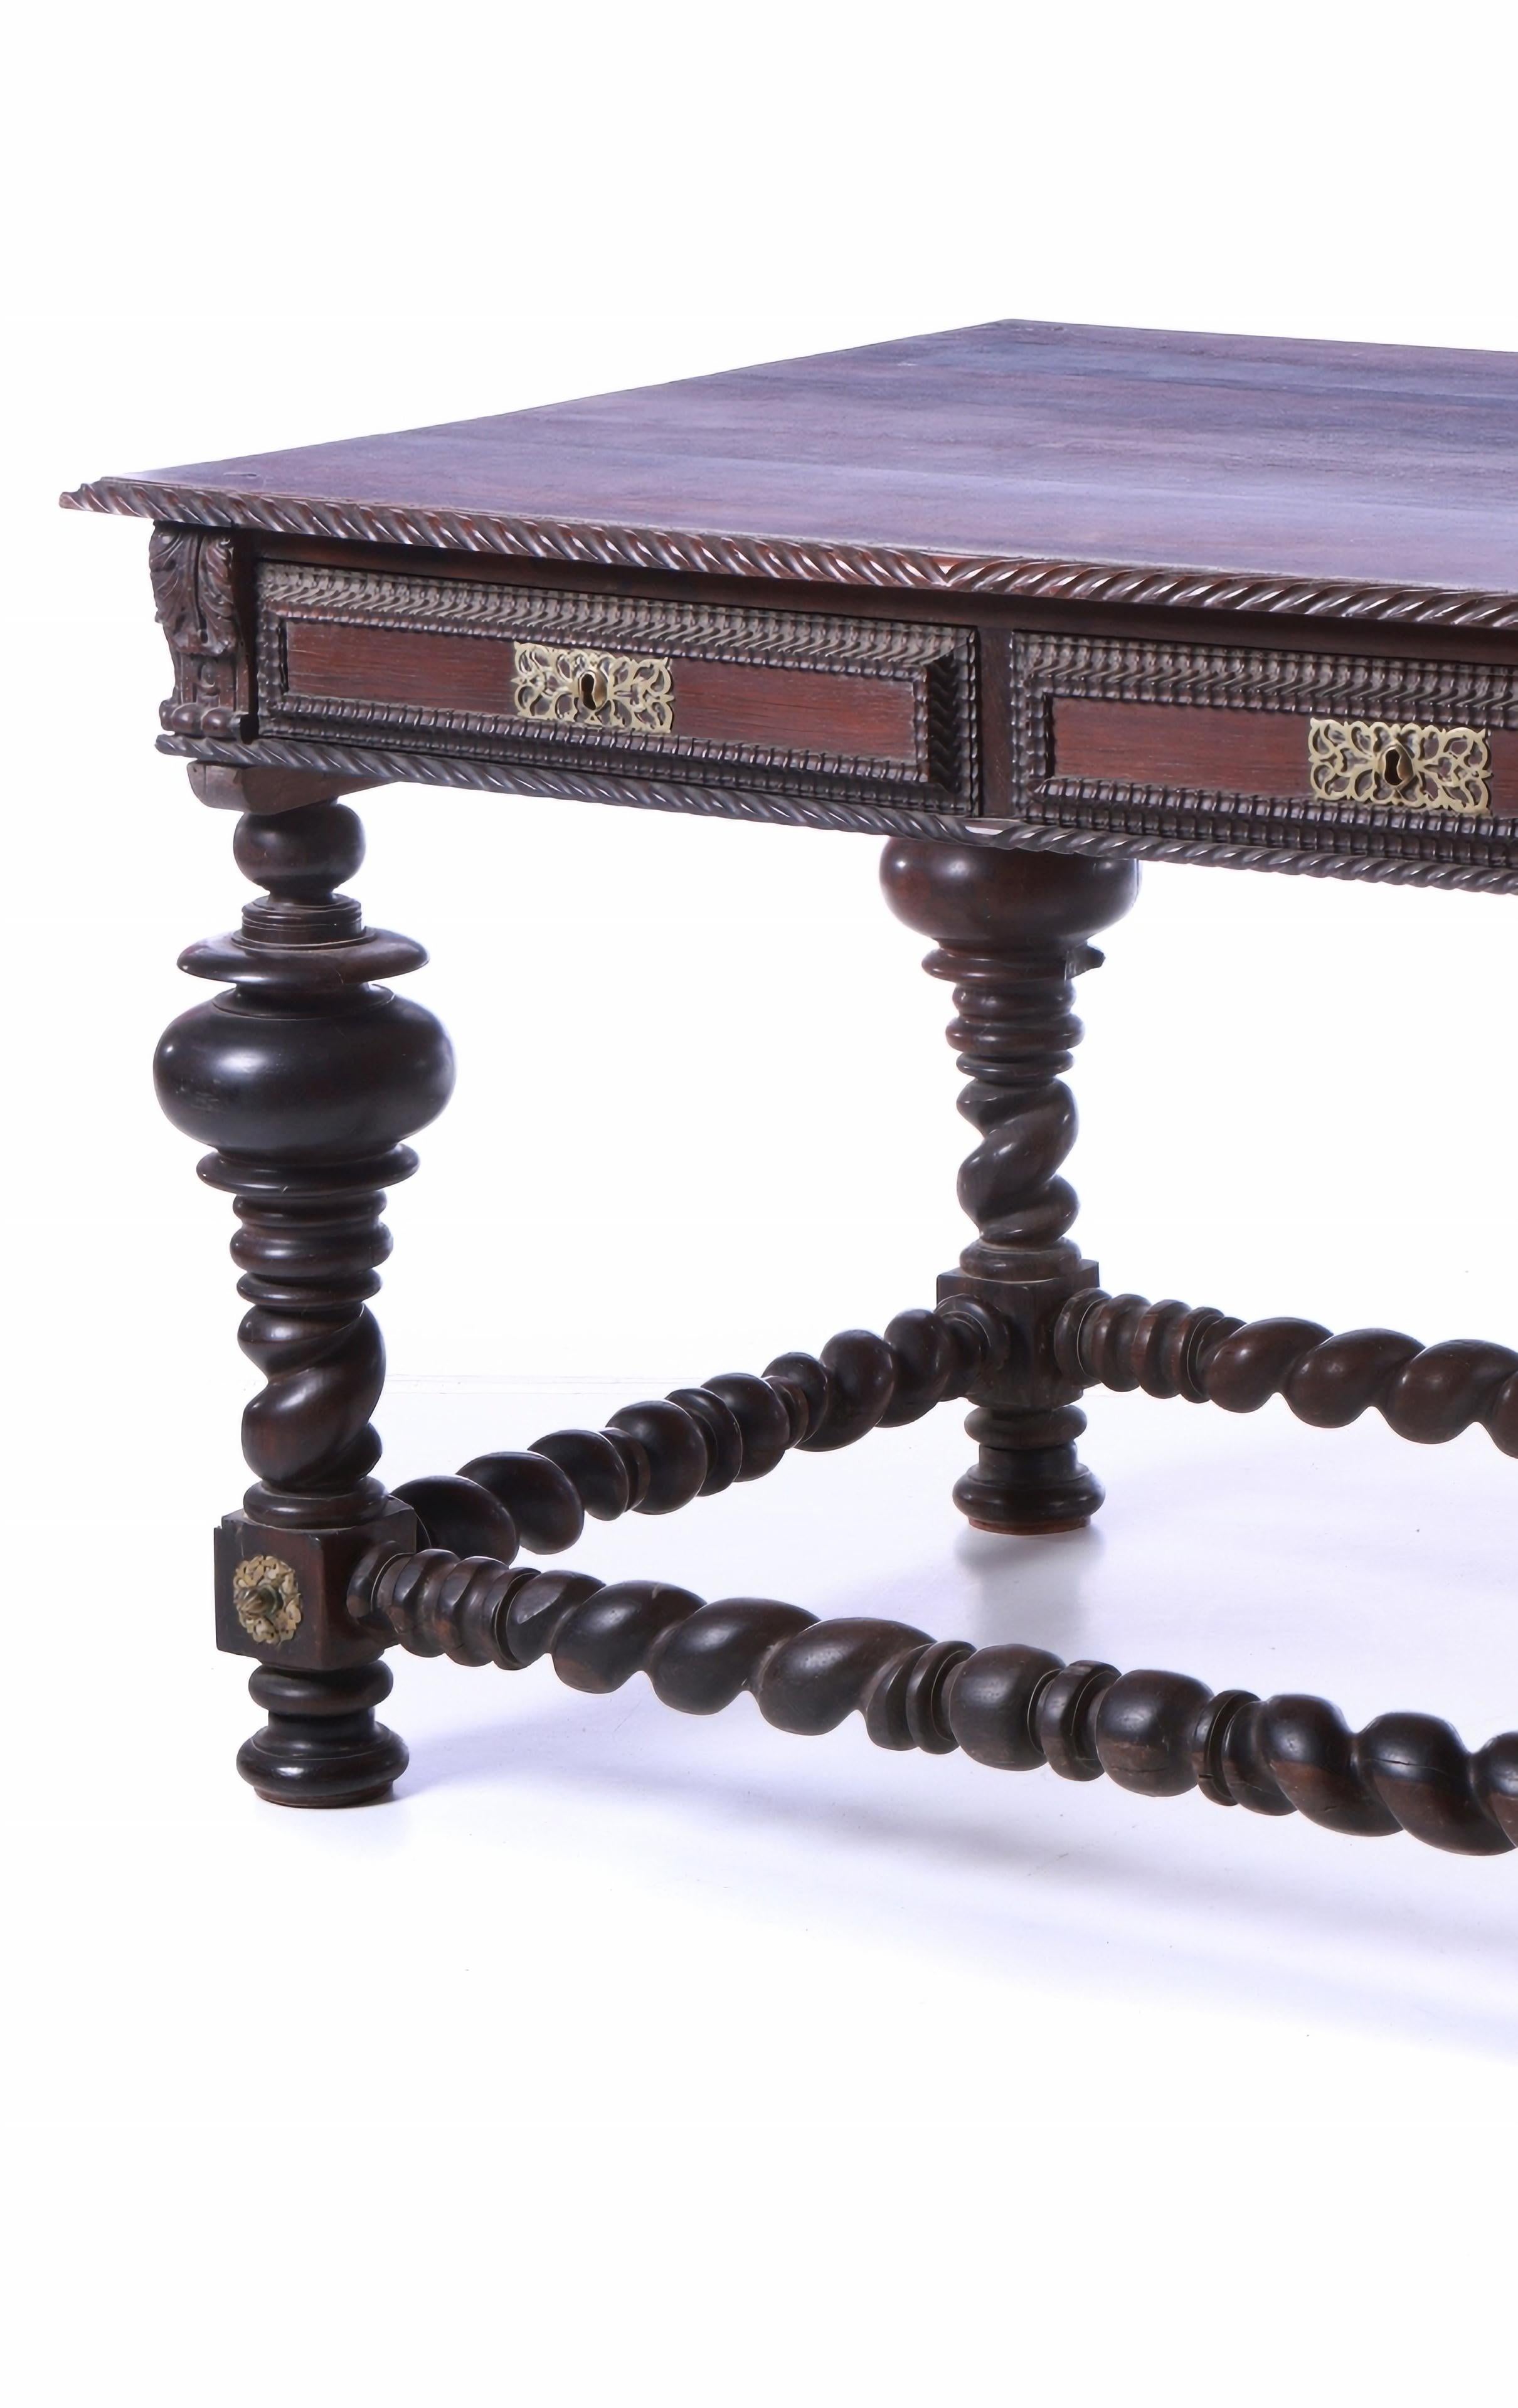 Hand-Crafted Portuguese Buffet Table 19th Century